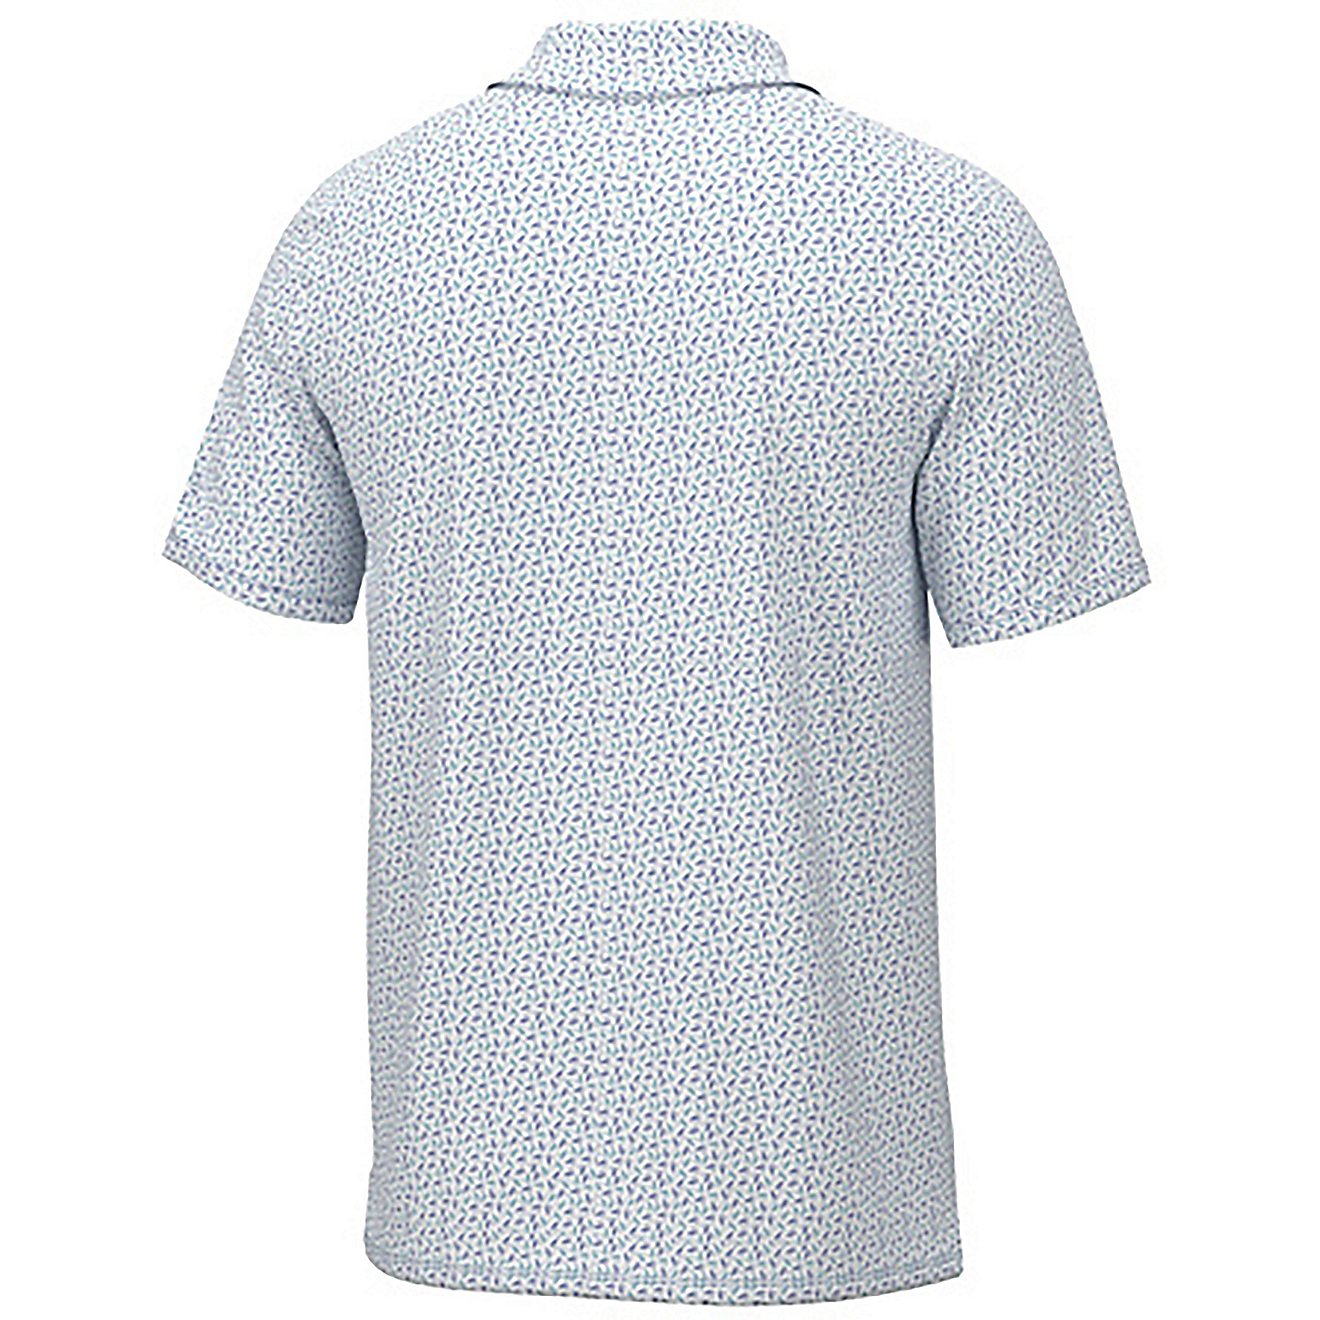 Huk Men’s Pursuit Jig Polo Shirt | Free Shipping at Academy